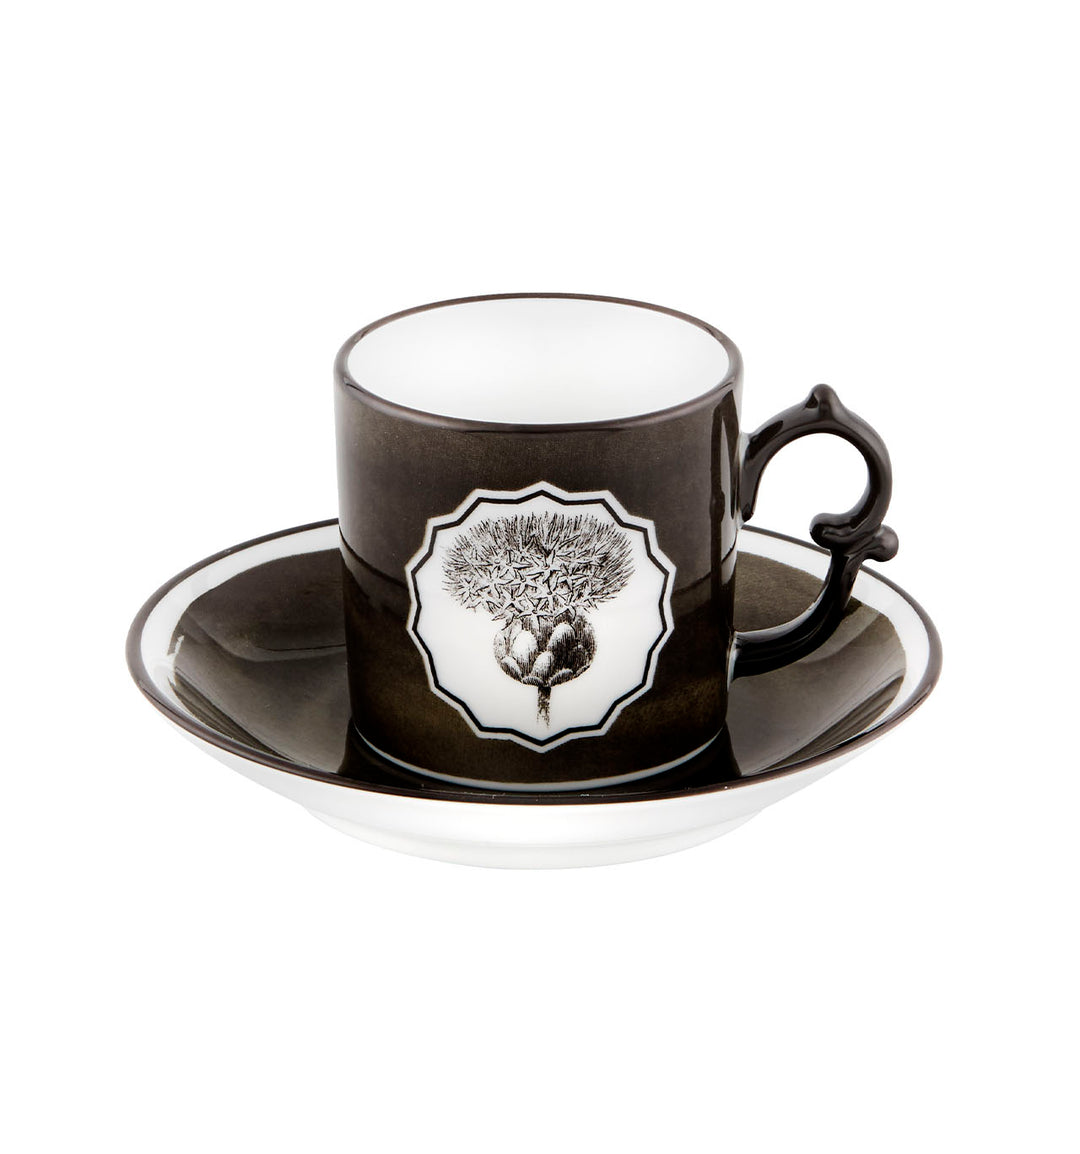 HERBARIAE COFFEE CUP AND SAUCER BLACK